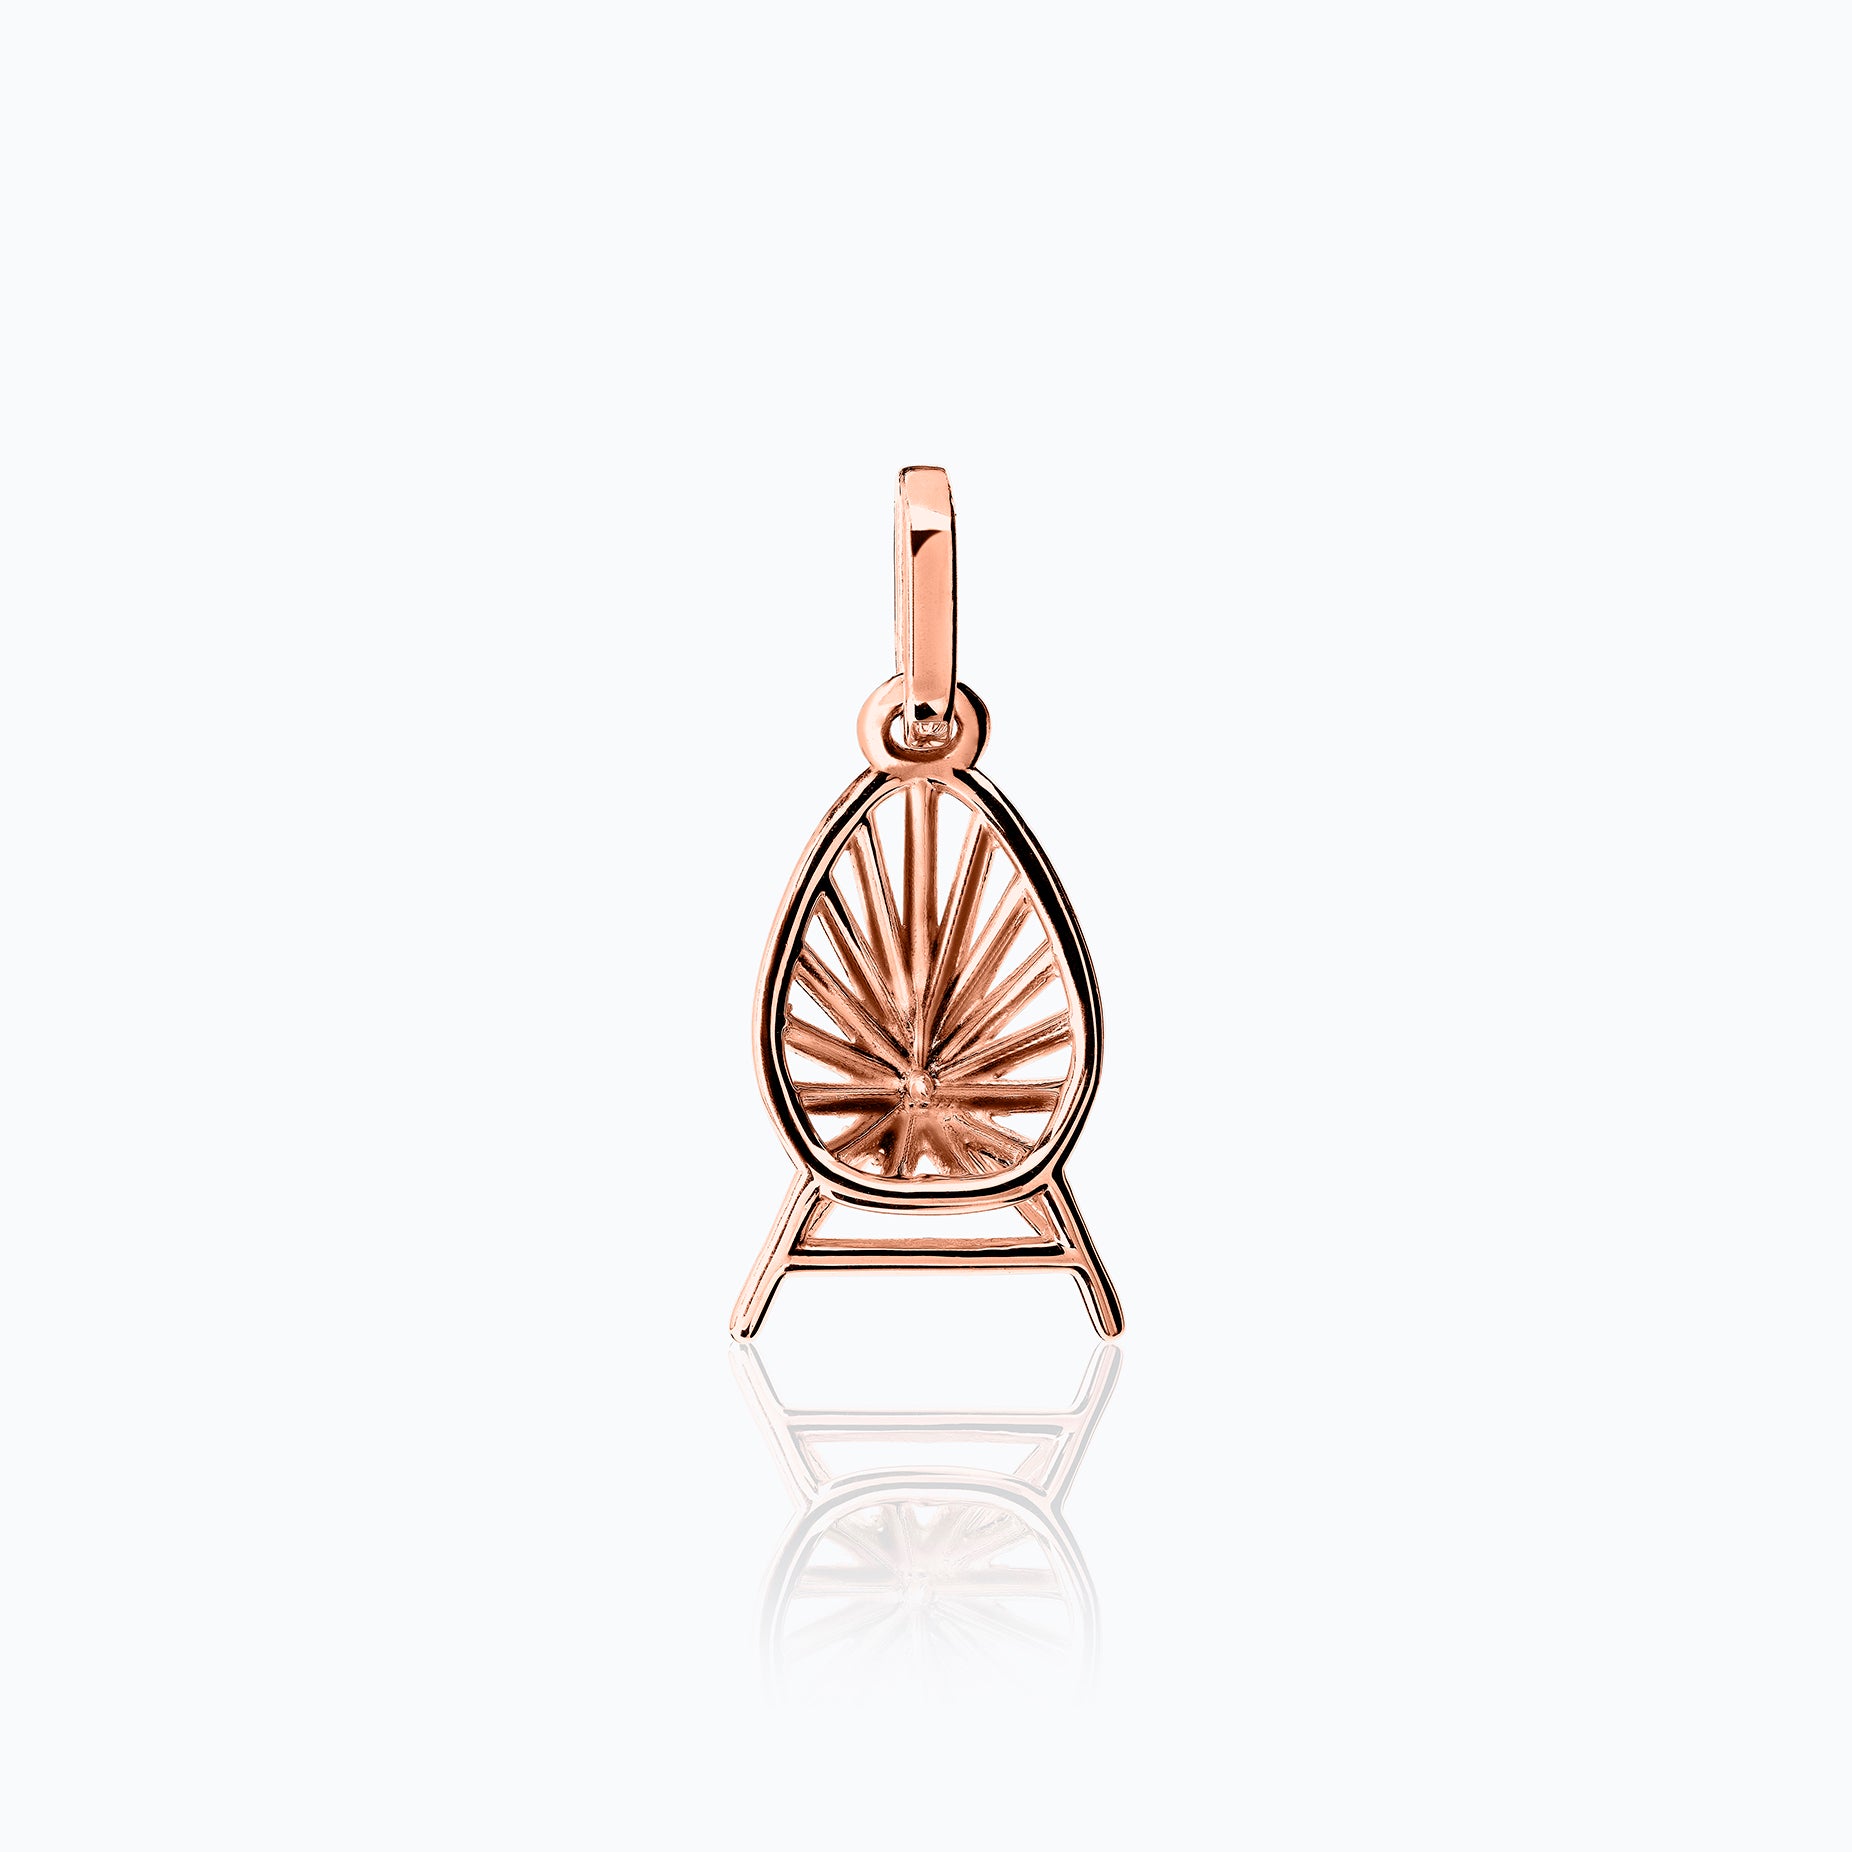 ACAPULCO CHAIR ROSE GOLD CHARM